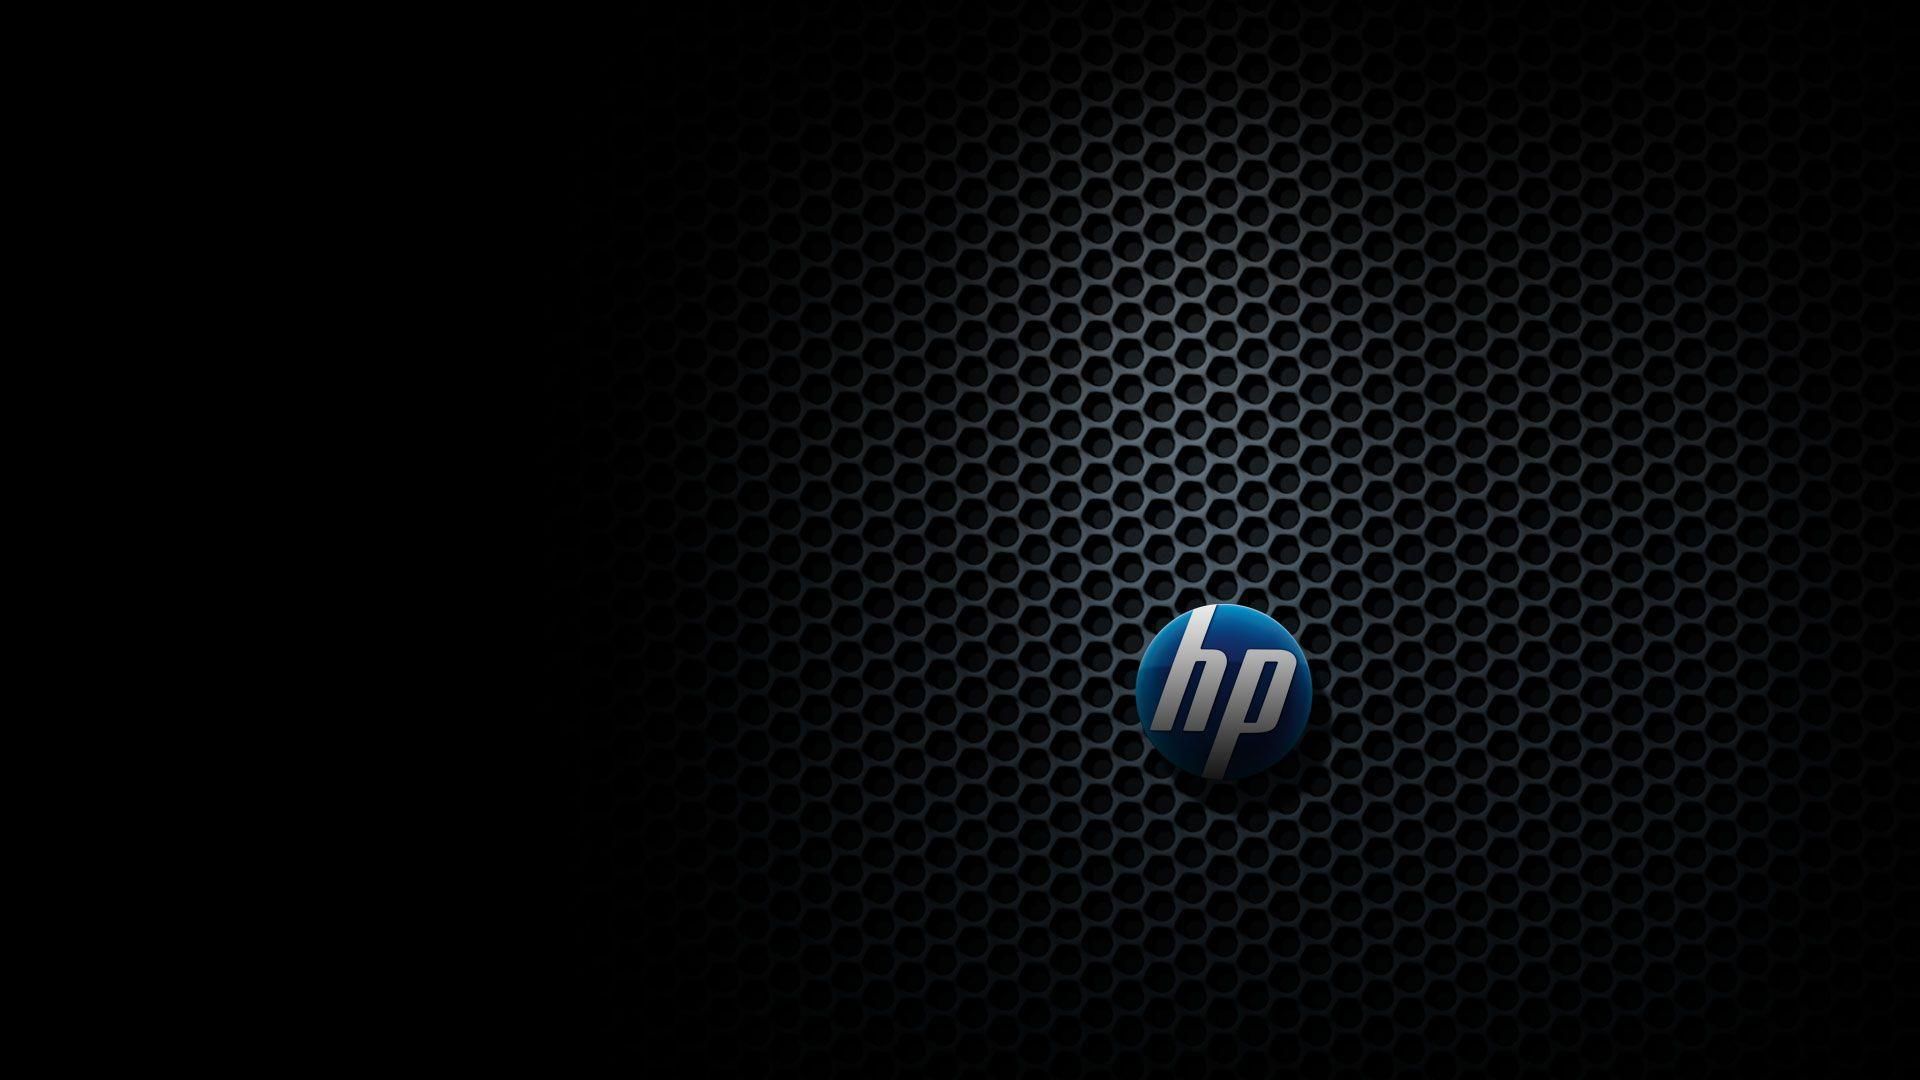 HP PC Wallpapers - Wallpaper Cave